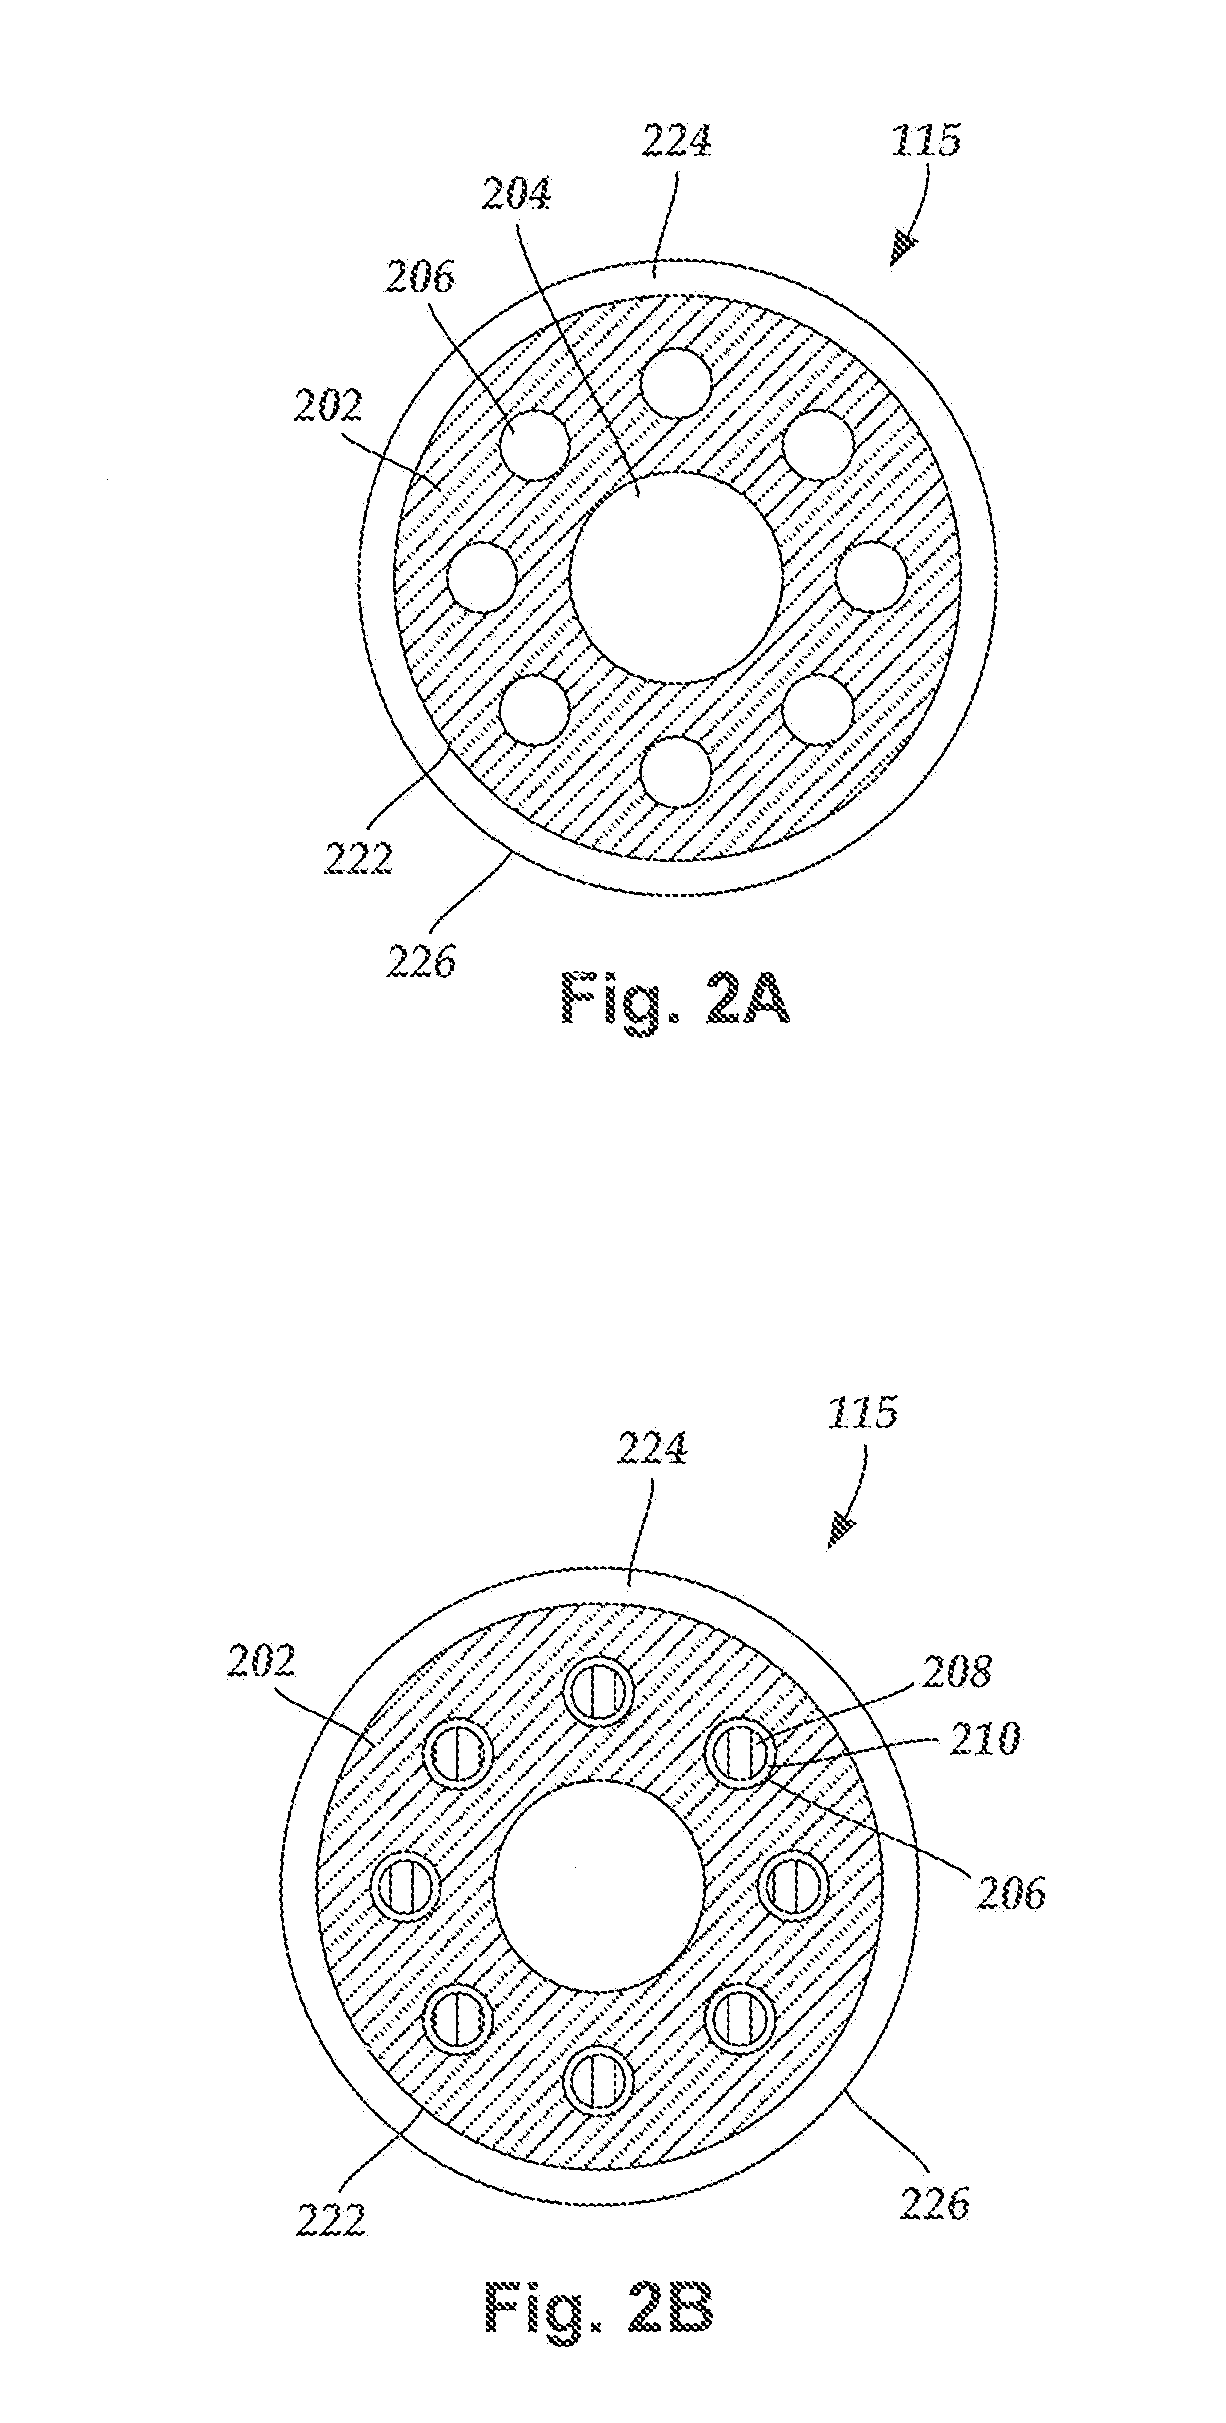 Leads with x-ray fluorescent capsules for electrode identification and methods of manufacture and use